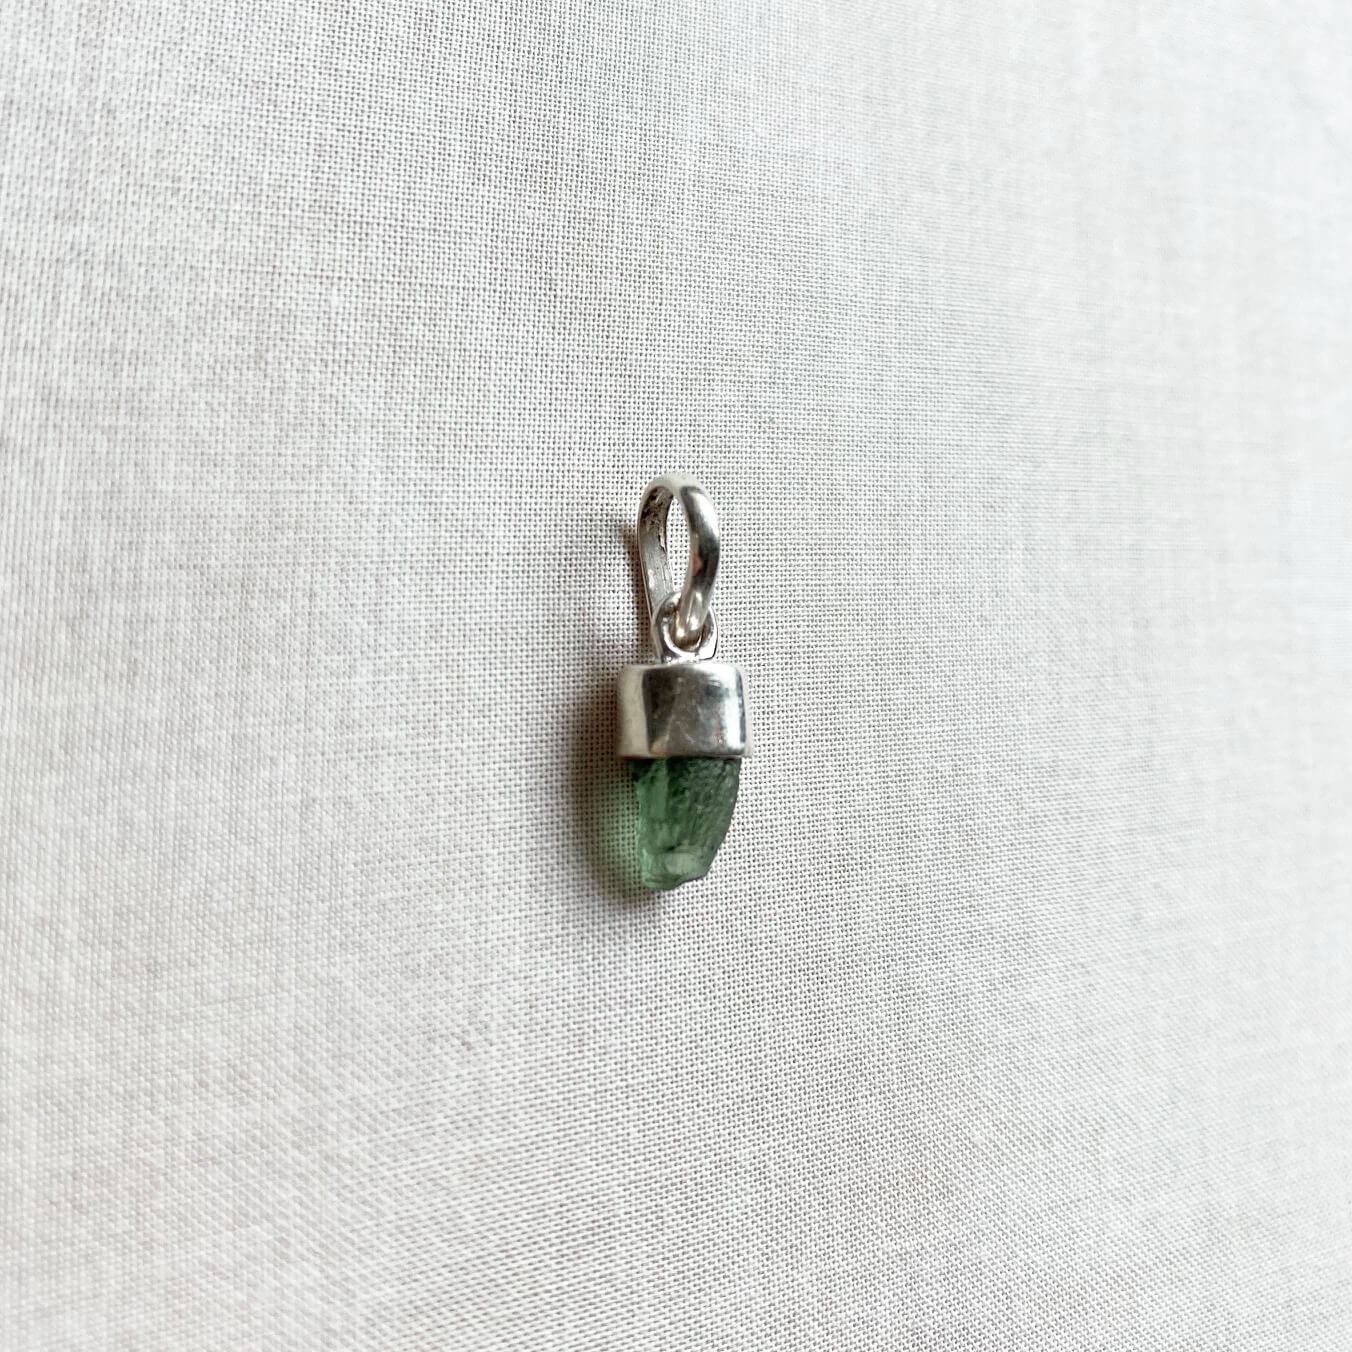 This is a moldavite pendant that is made of genuine Moldavite with sterling silver